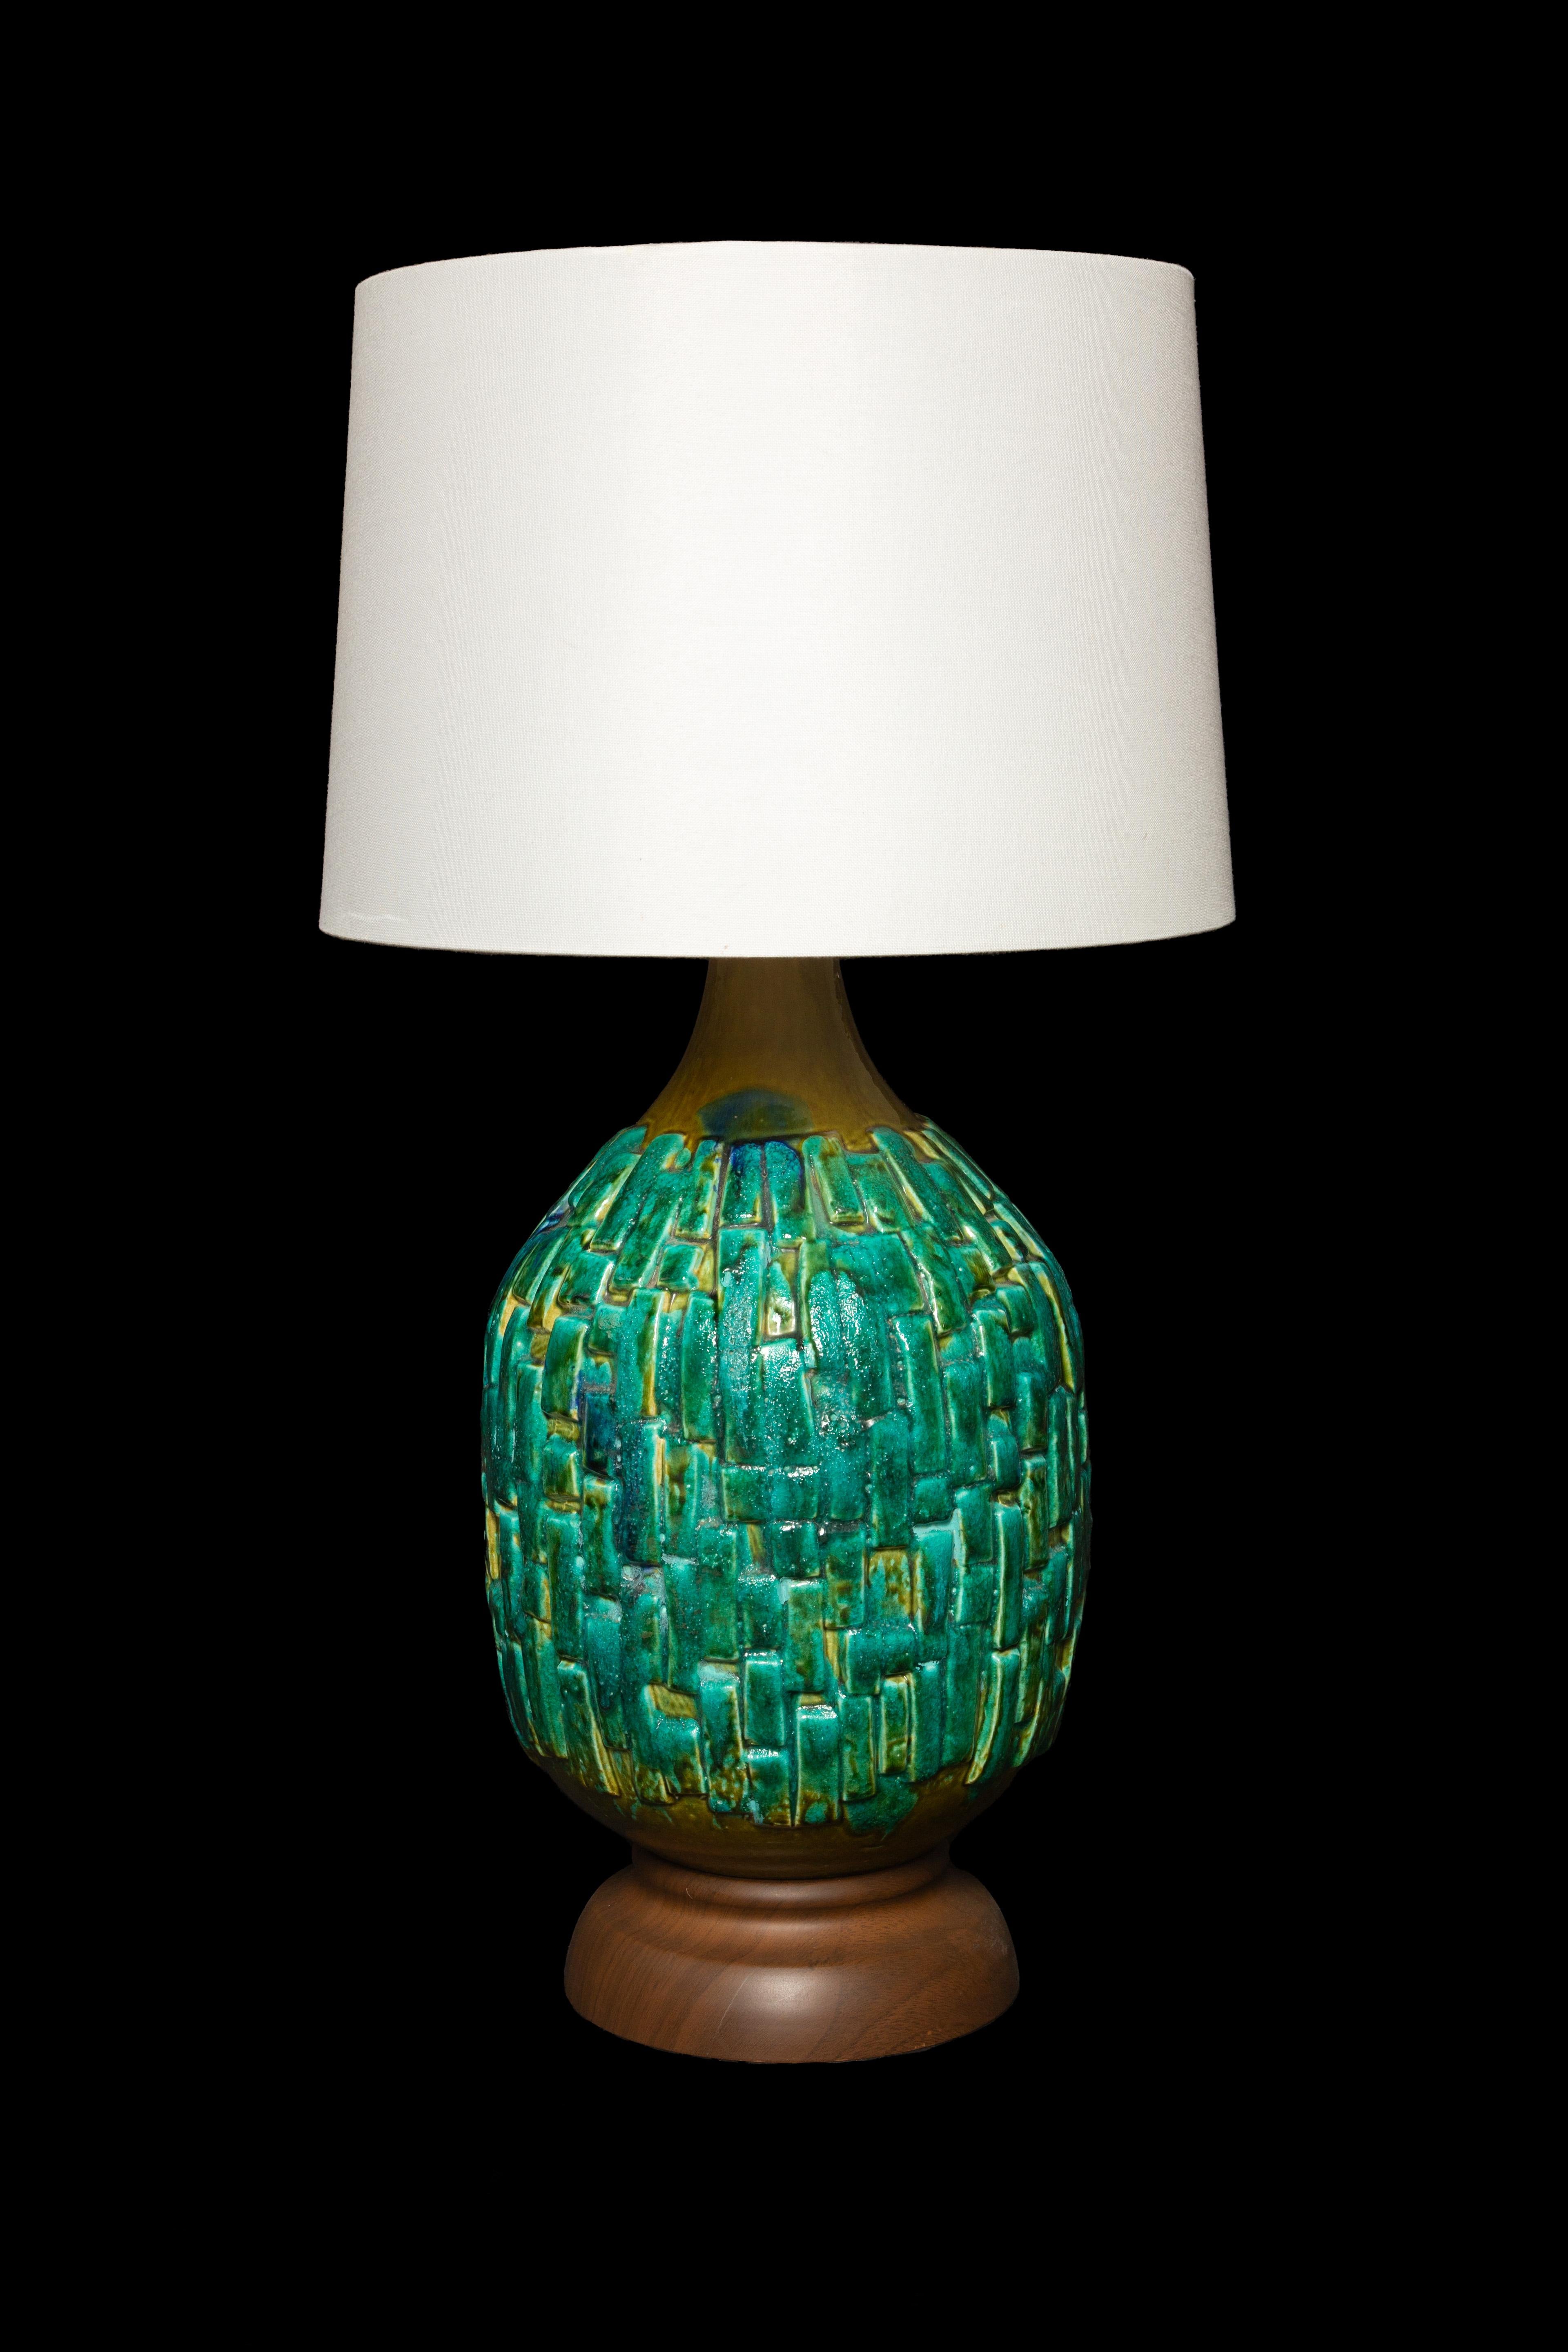 This Large Mid-Century Turquoise Ceramic Lamp is a beautiful and eye-catching addition to any room. Standing at a height of 34 inches, it has a commanding presence that draws attention. The rich Turquoise ceramic base adds a touch of sophistication